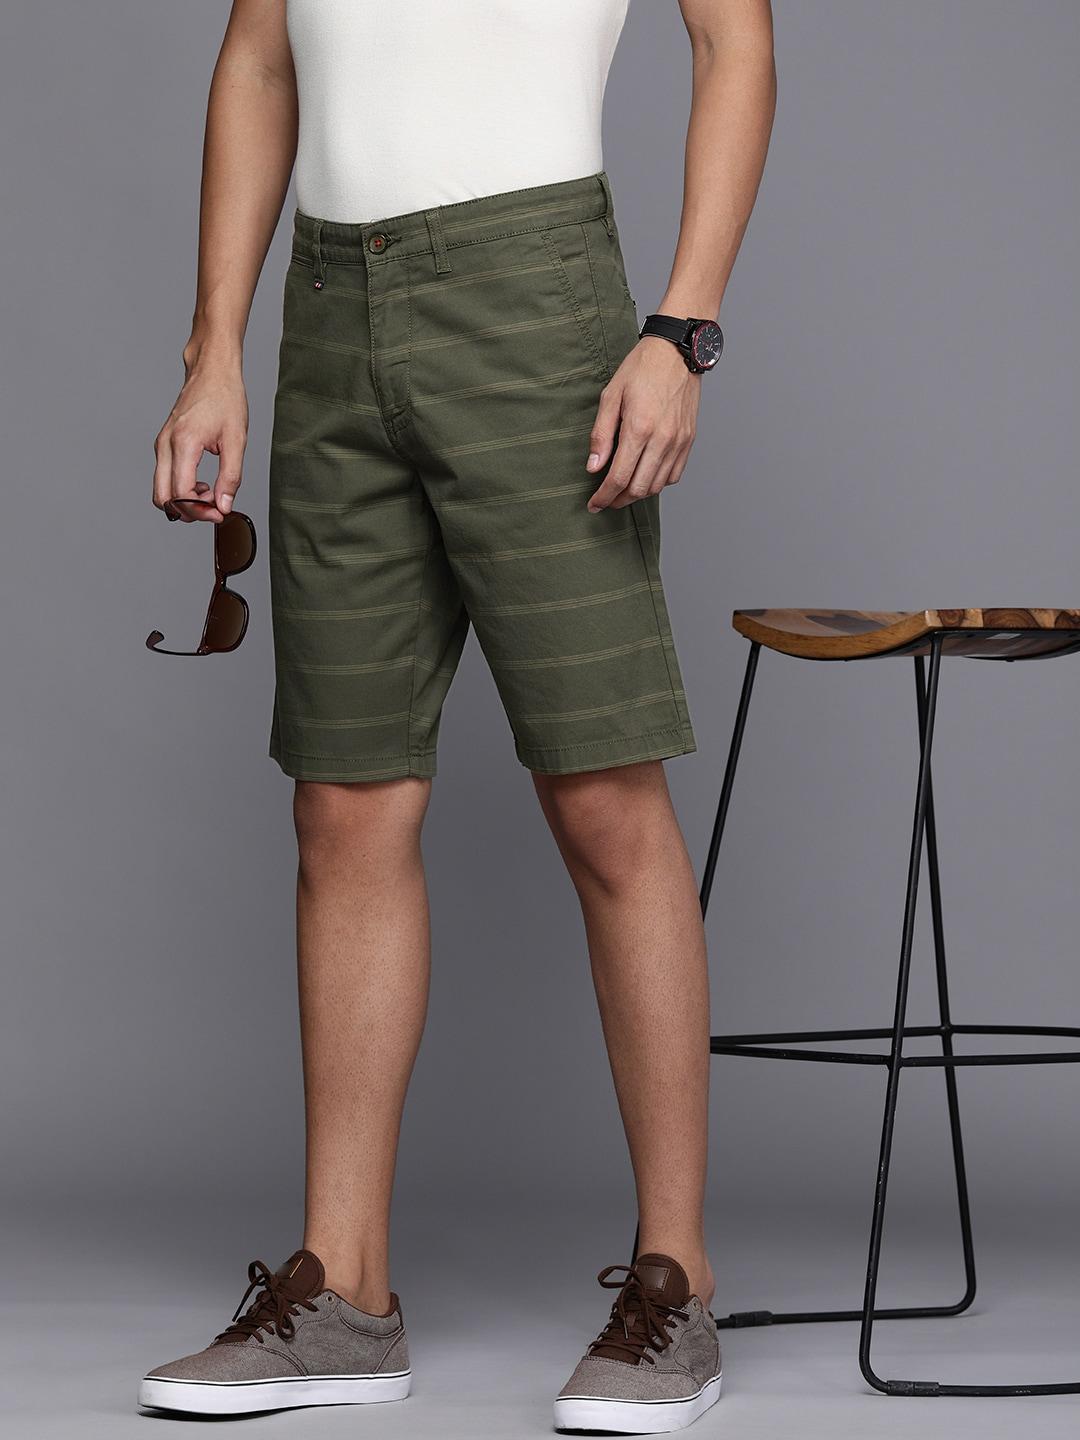 louis philippe sport men olive green striped slim fit shorts